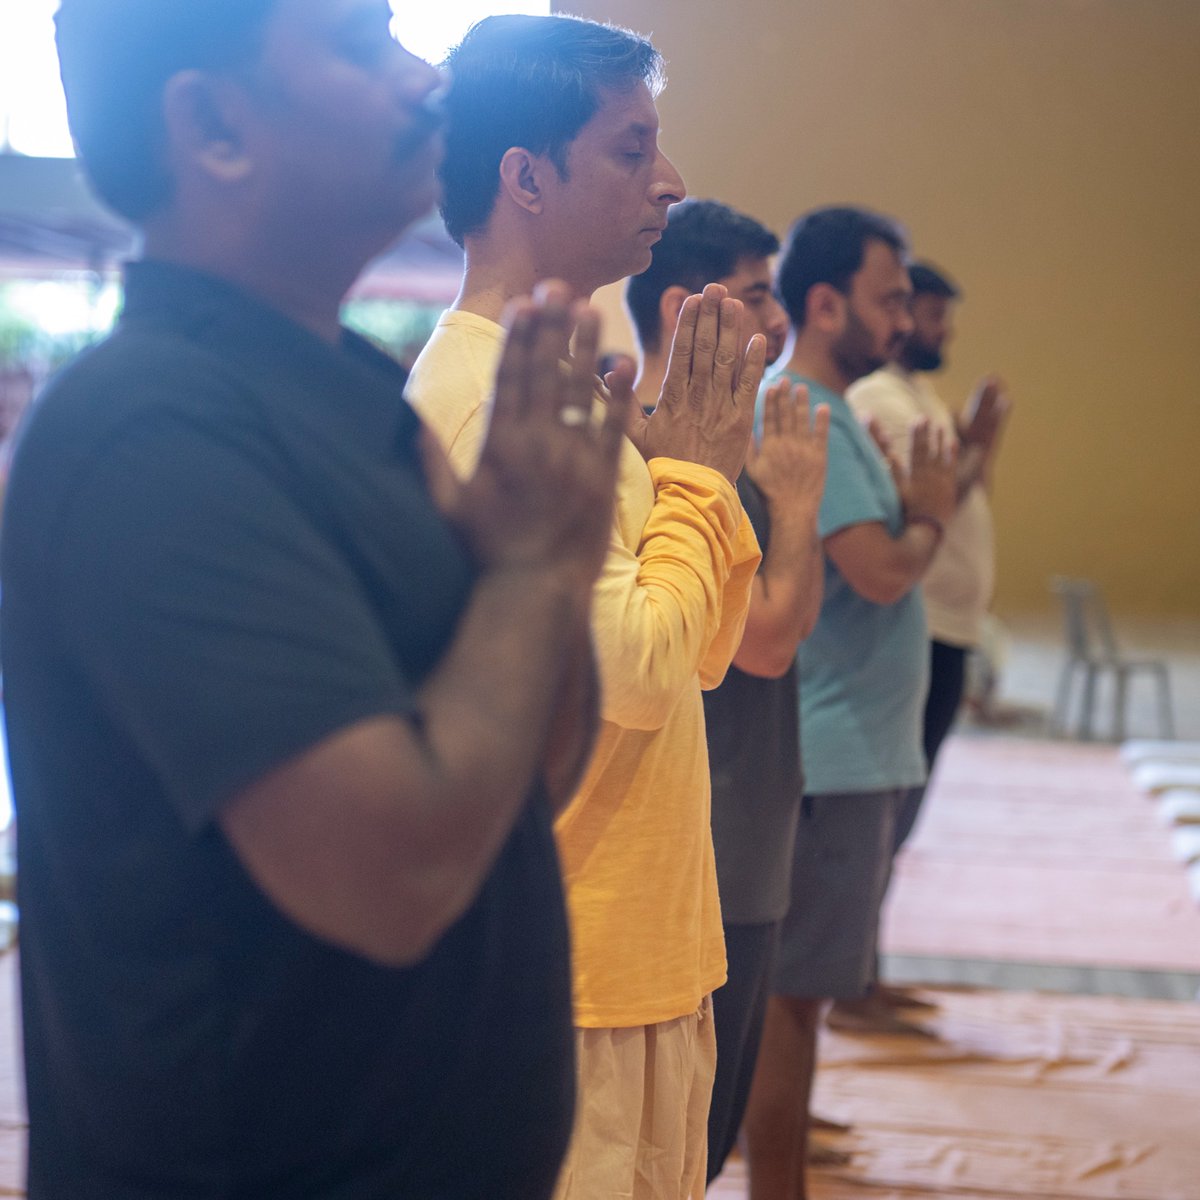 Ensuring participants are primed for a day filled with cutting-edge information, they commenced day 3 of the leadership intensive with a guided Yoga and meditation session. #insight2023 emphasizes holistic entrepreneur growth, balancing inner growth with skill enhancement.